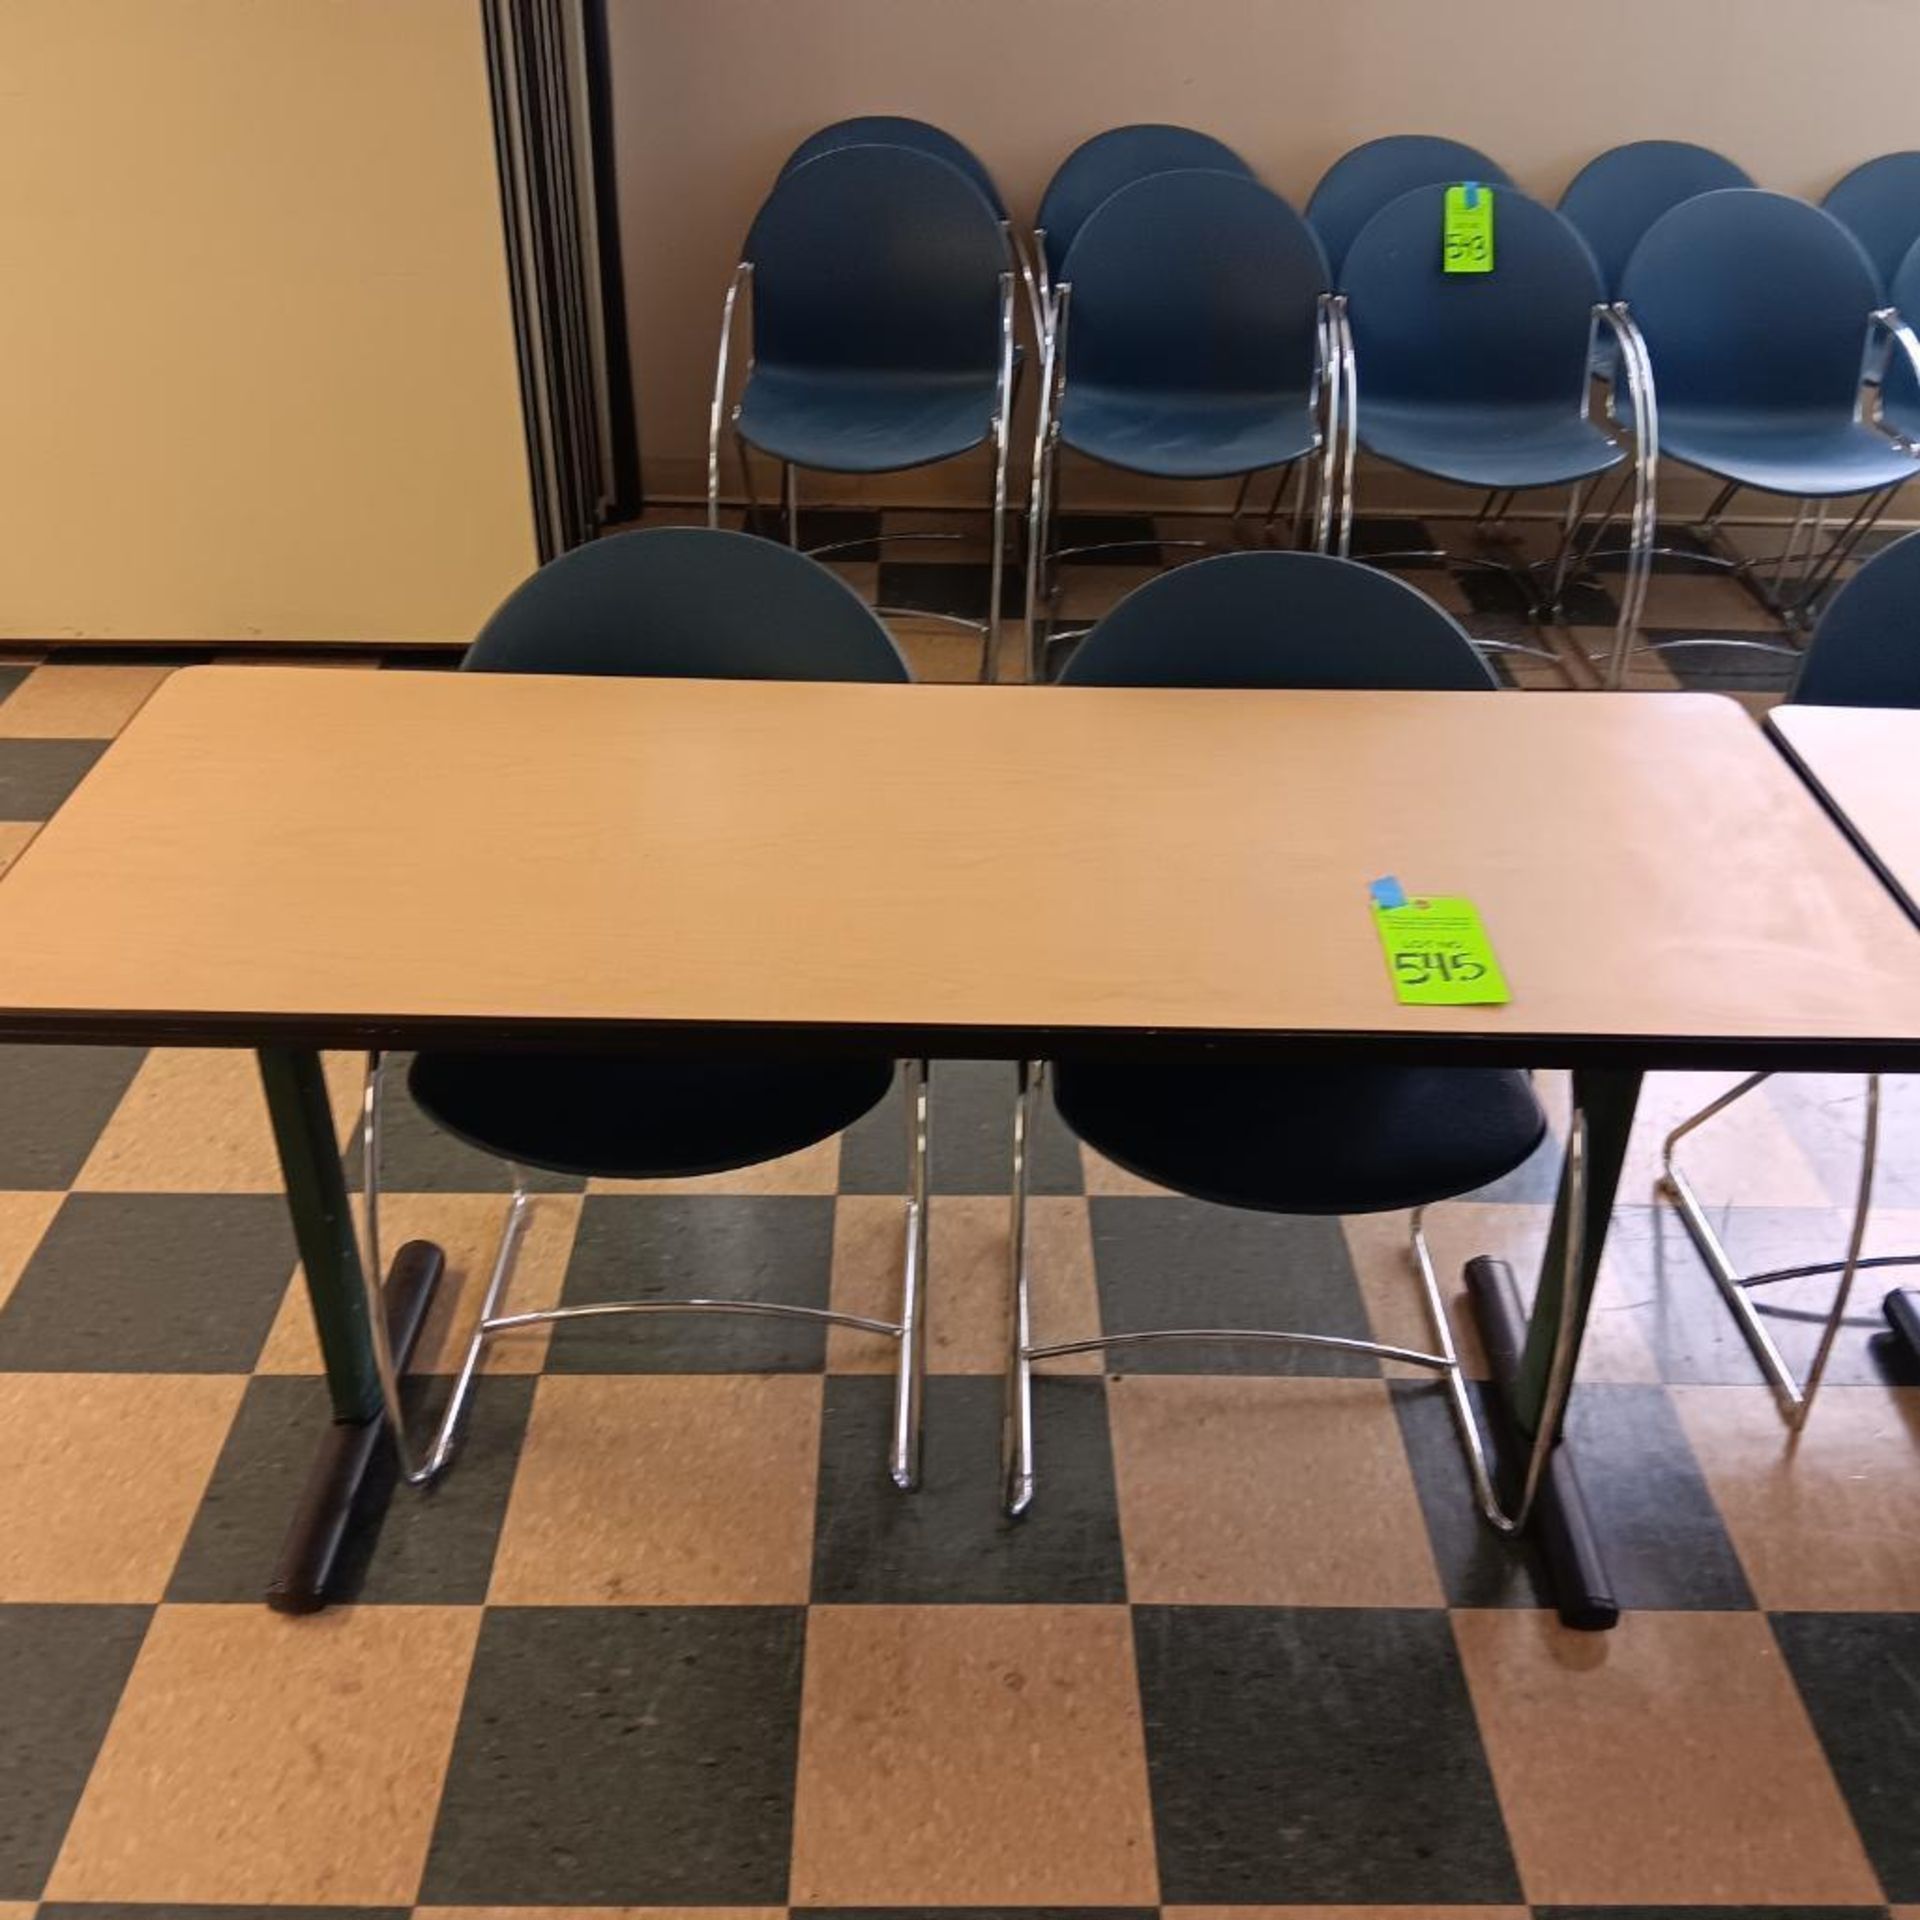 Table with 2 Chairs